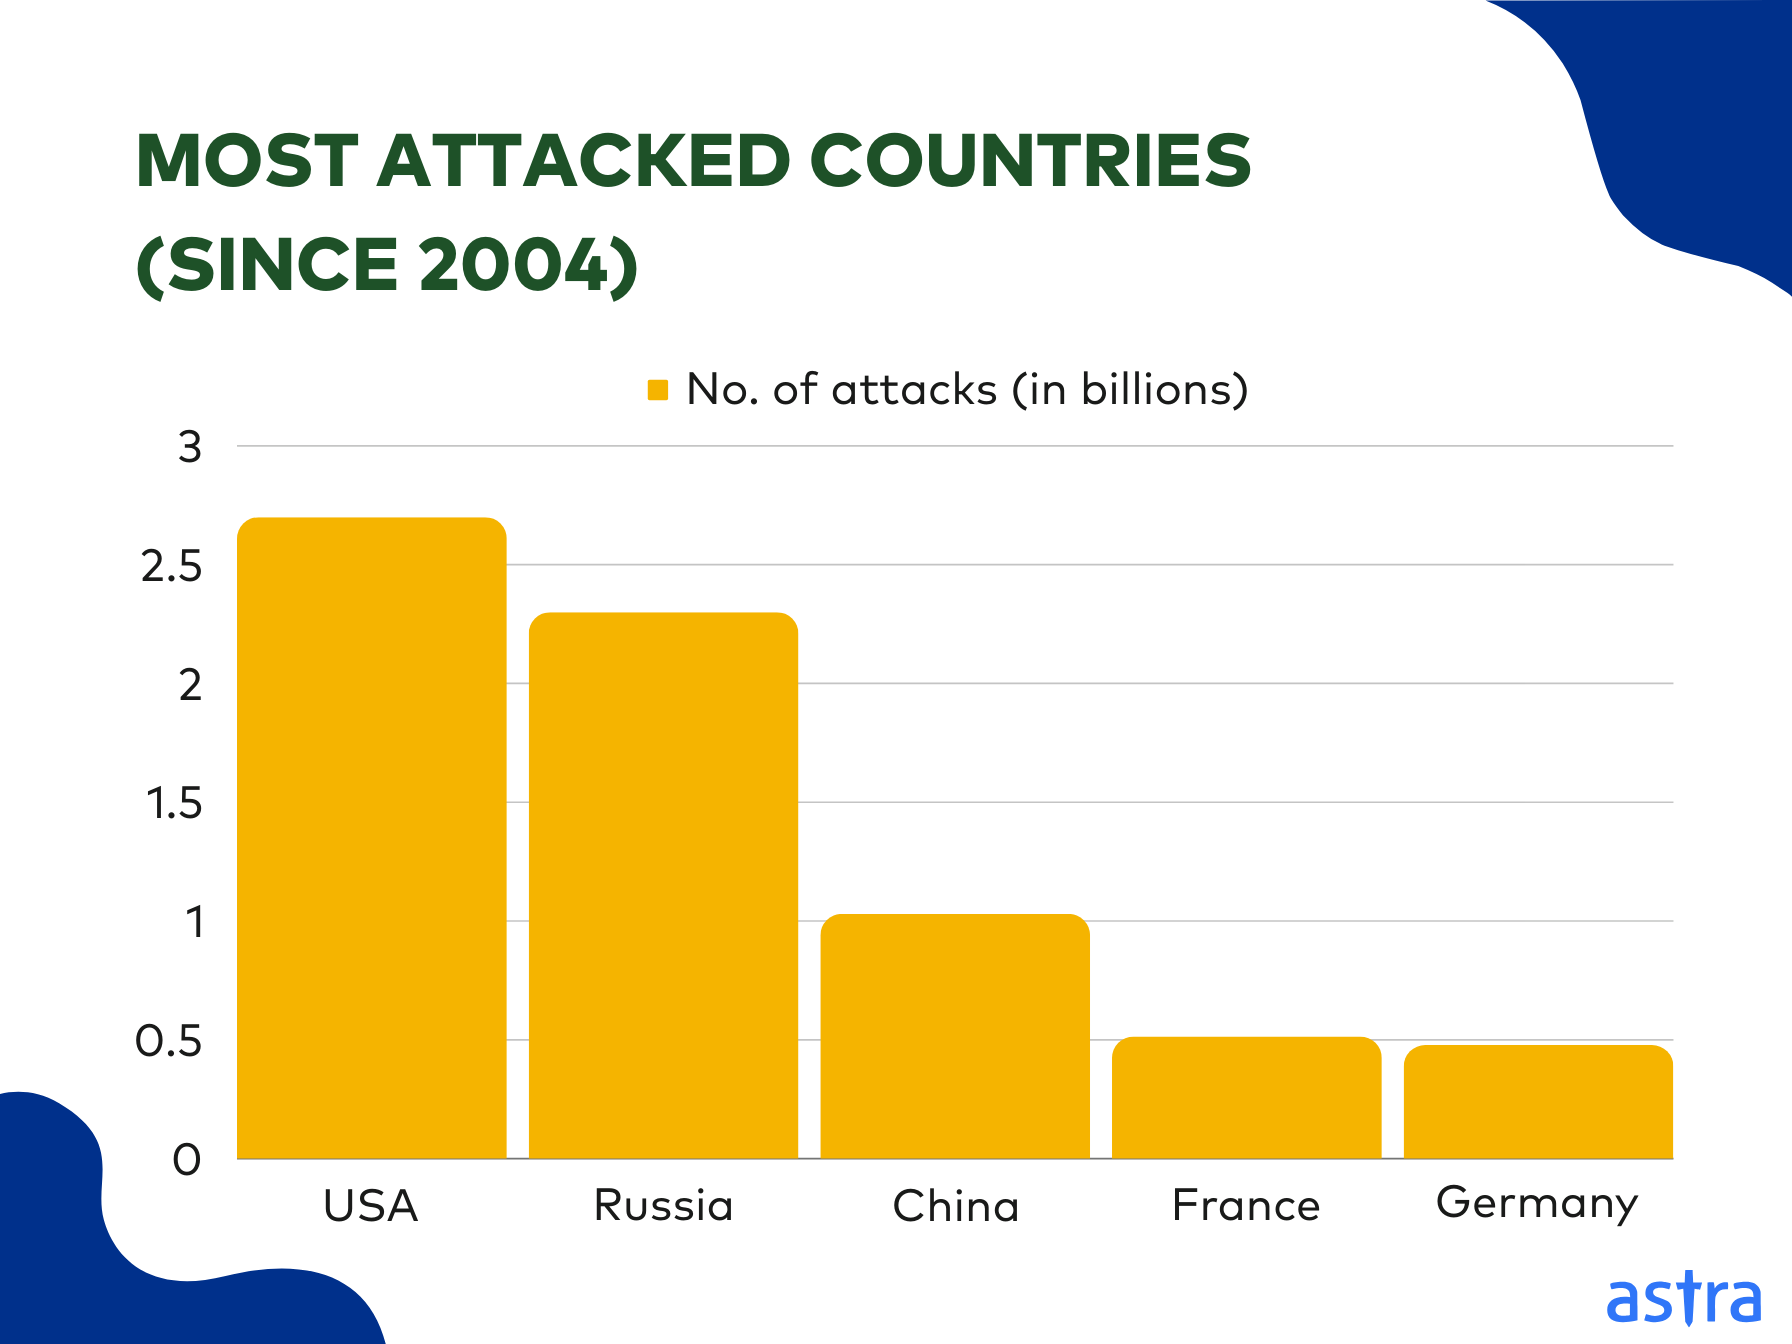 Most attacked countries (since 2004)